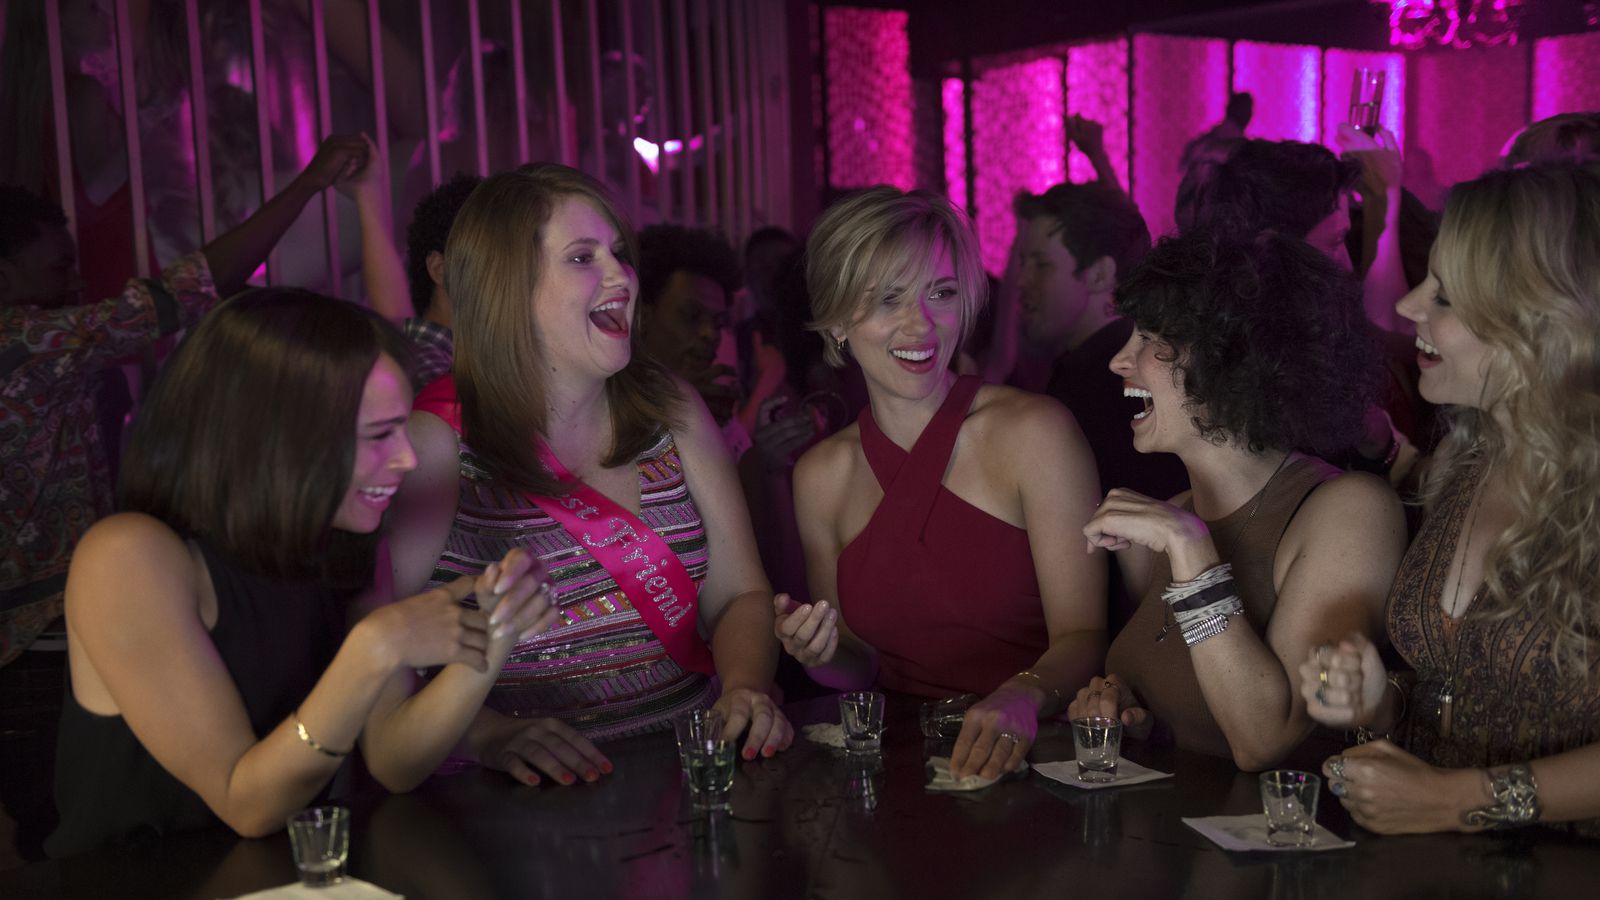 Like its characters, Rough Night is far from perfect but often hilarious